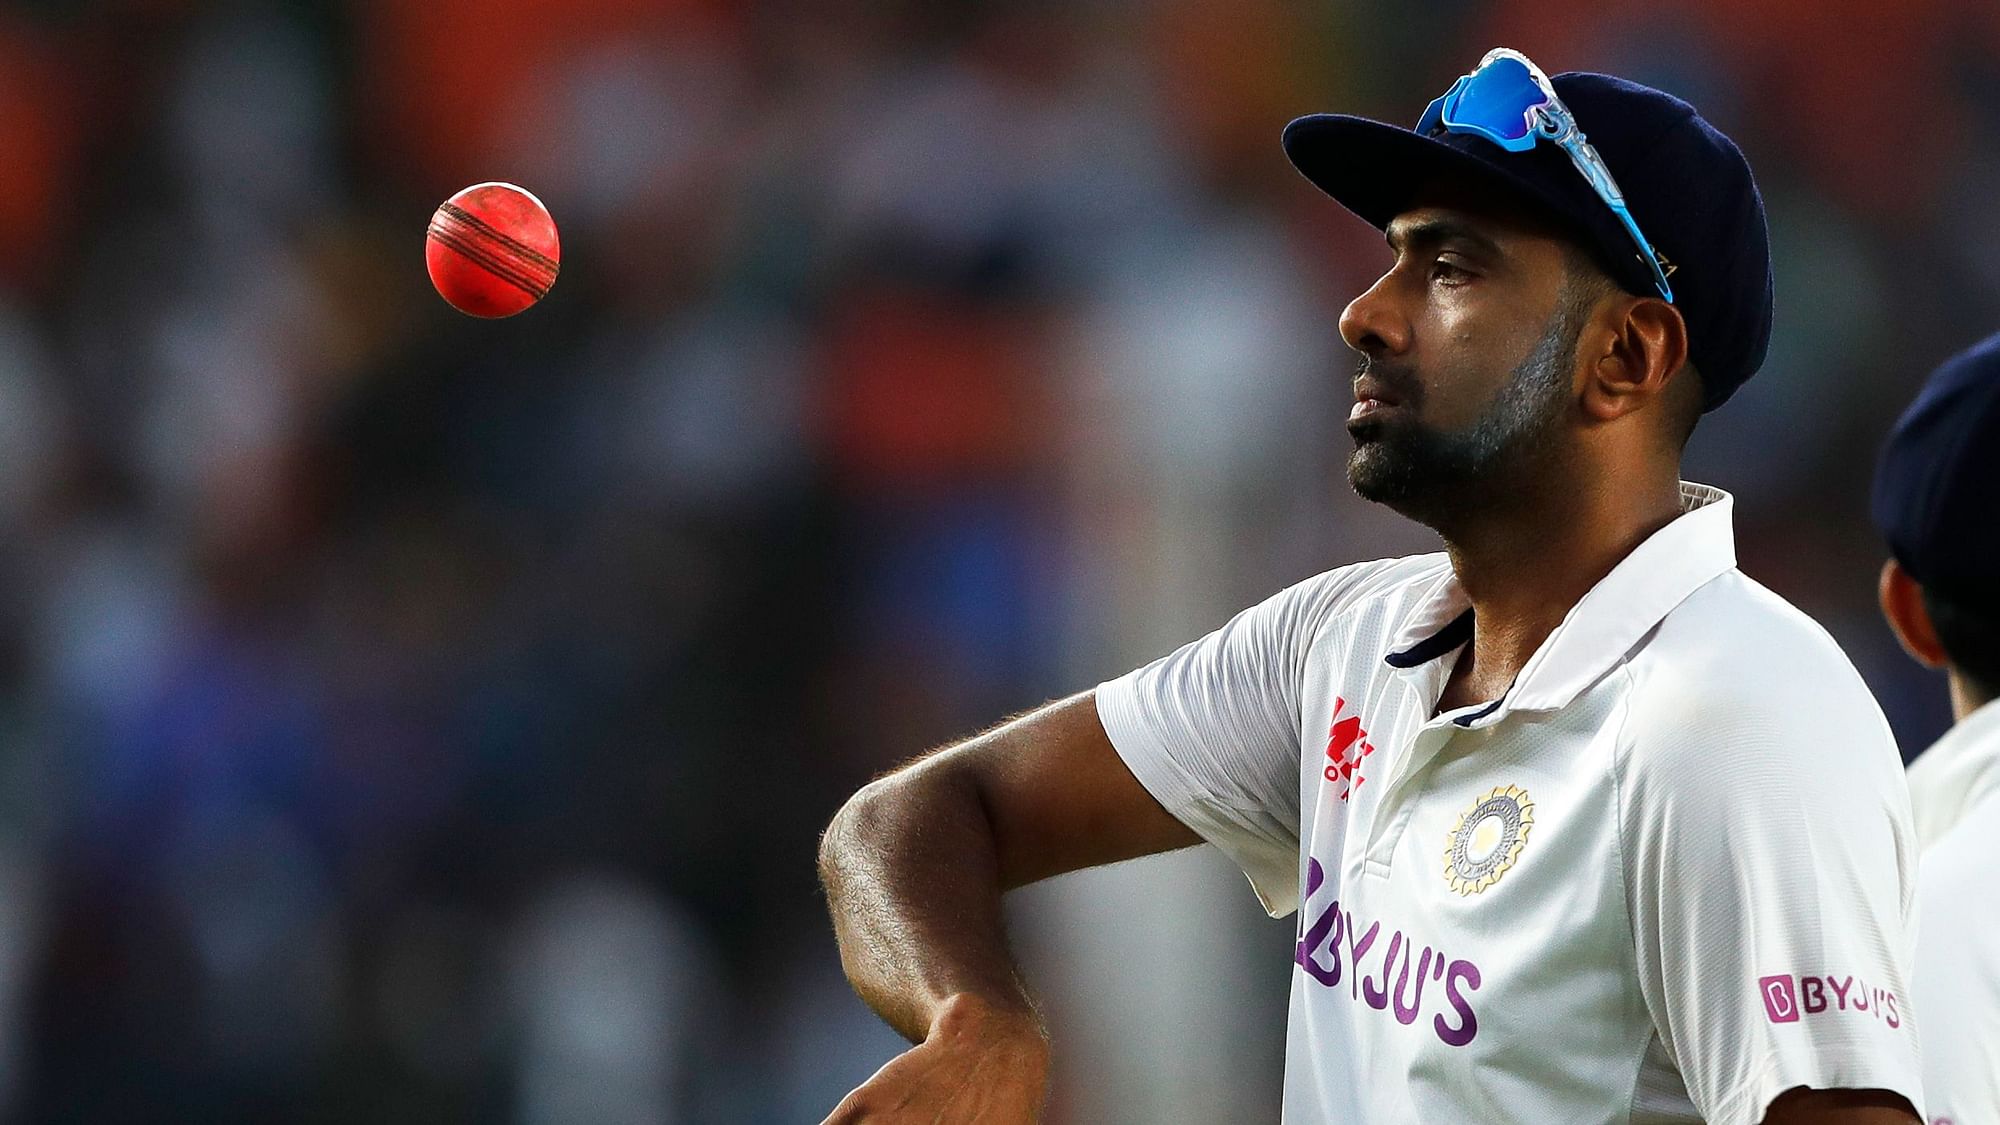 Ashwin could end up being India’s second-highest wicket-taker in Tests – second only to Anil Kumble.